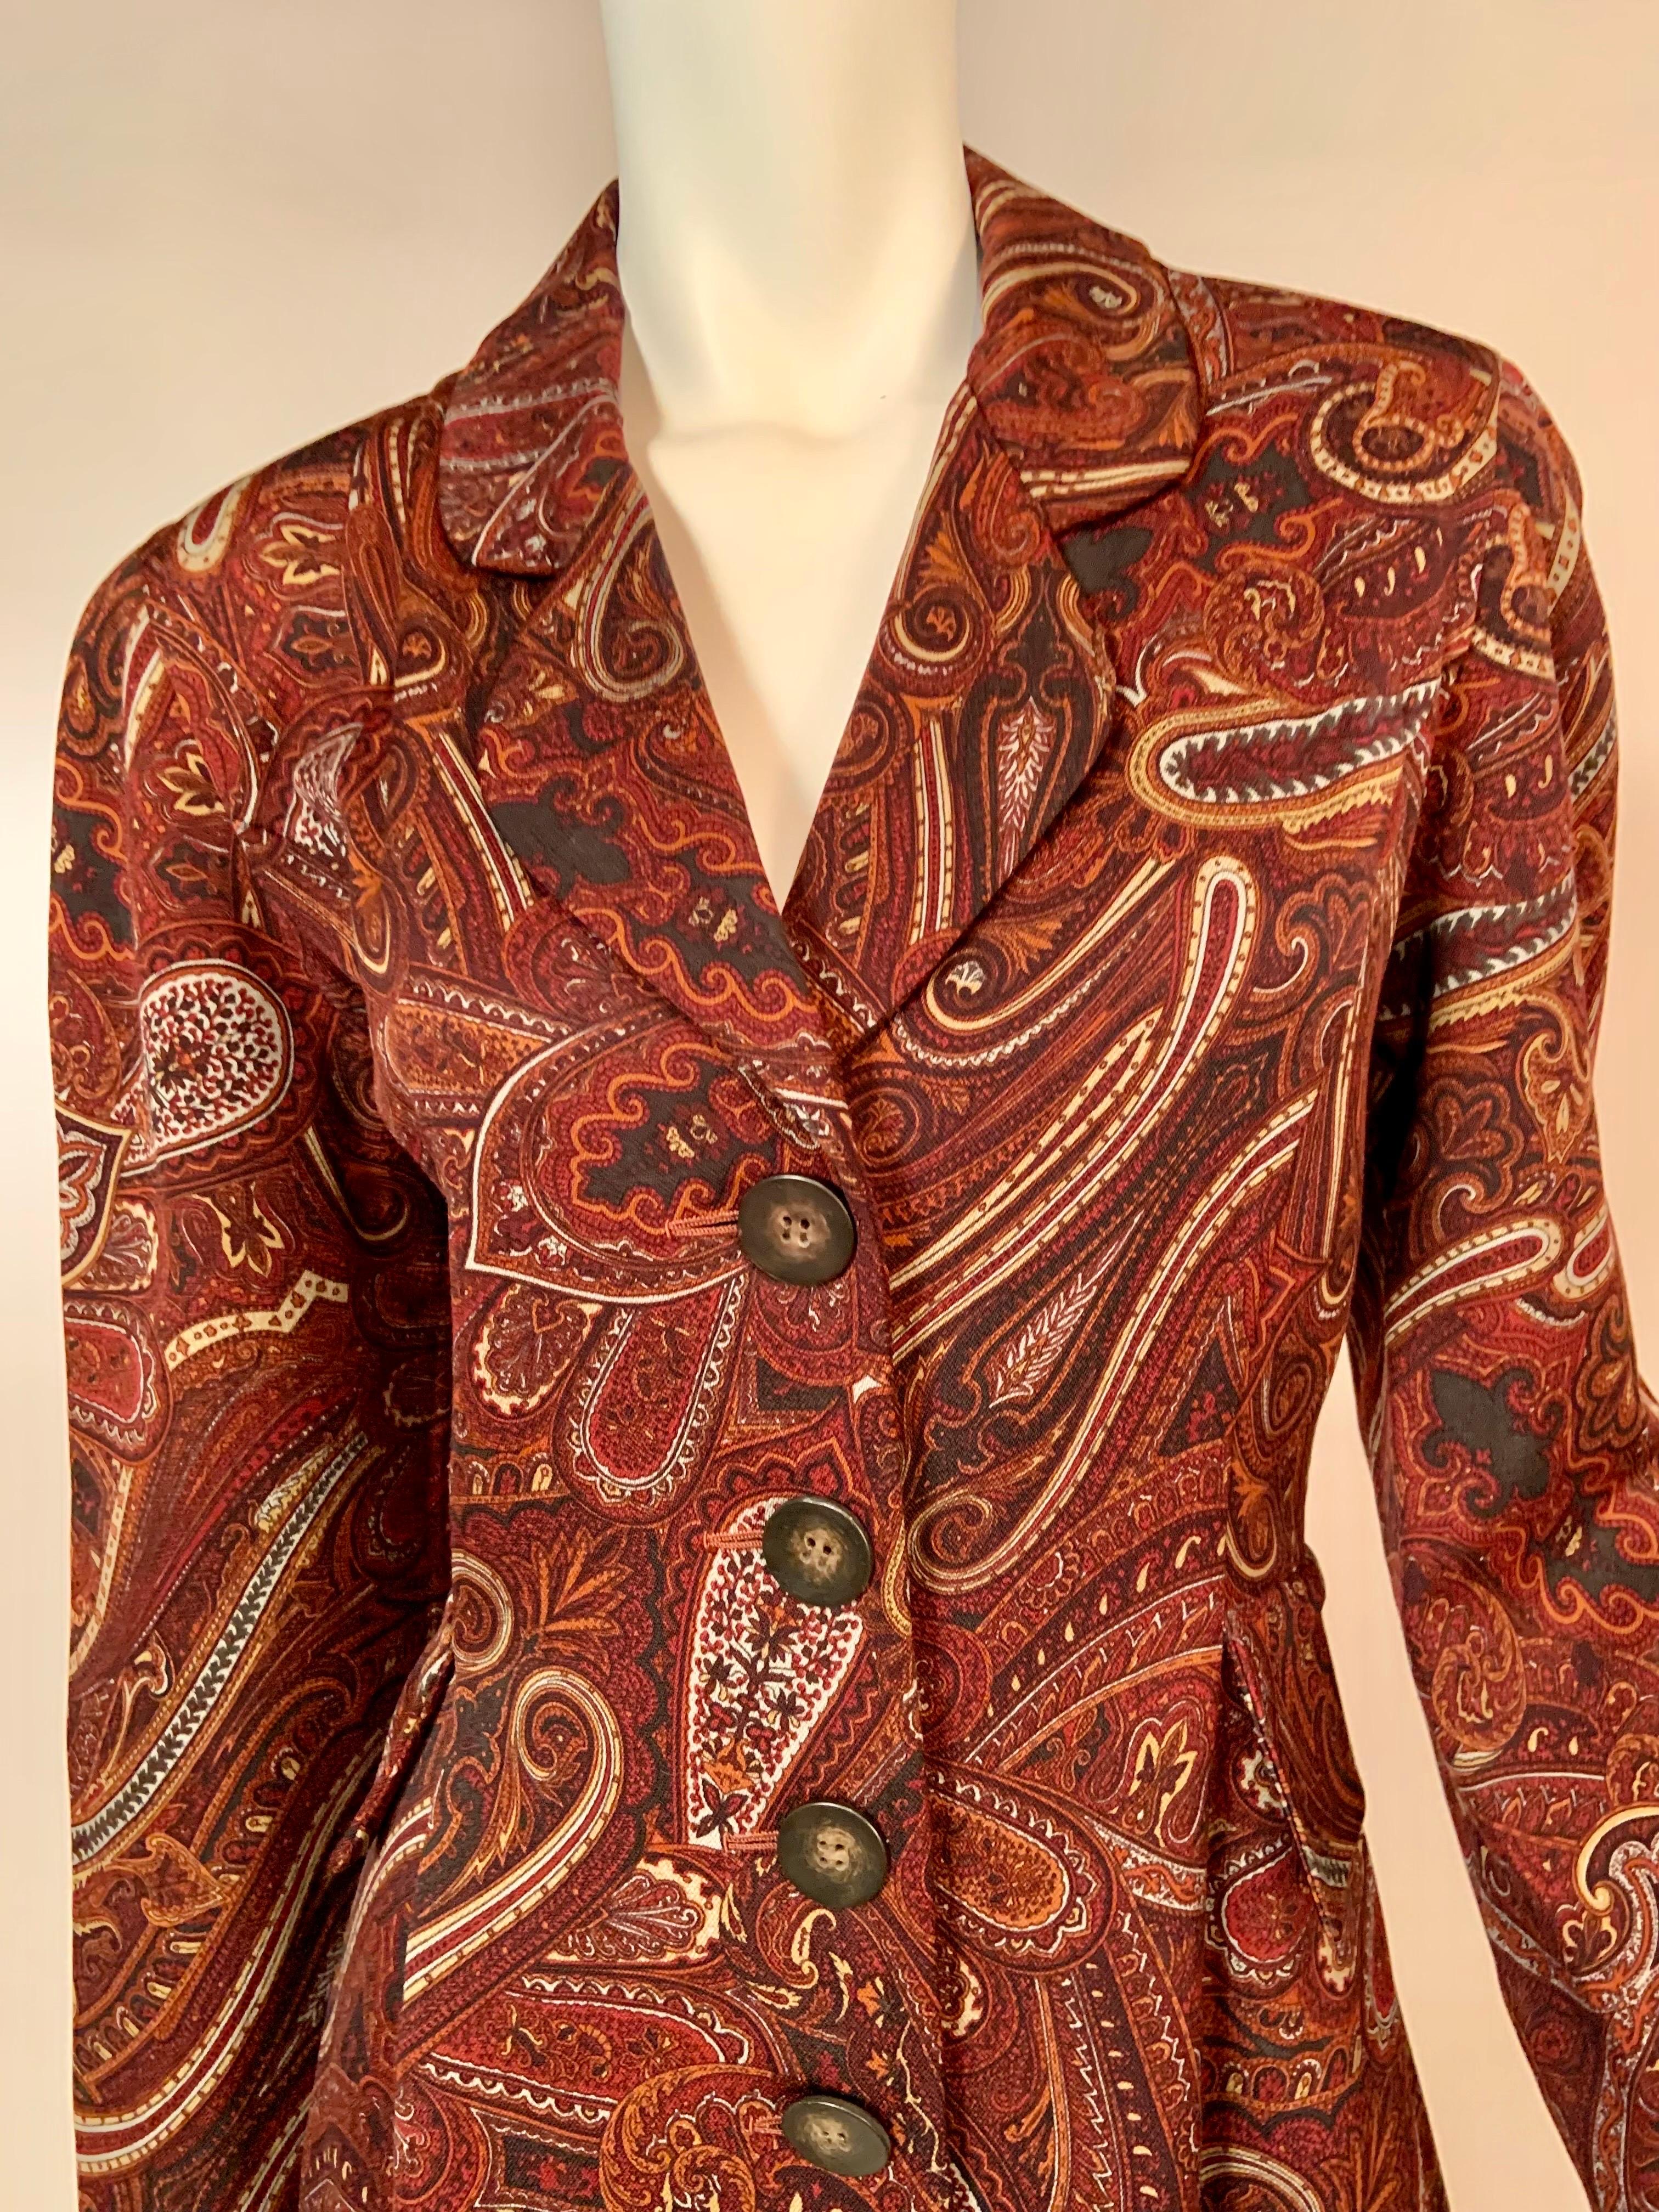 Bill Blass Paisley Patterned Coat in a Larger Size In Excellent Condition For Sale In New Hope, PA